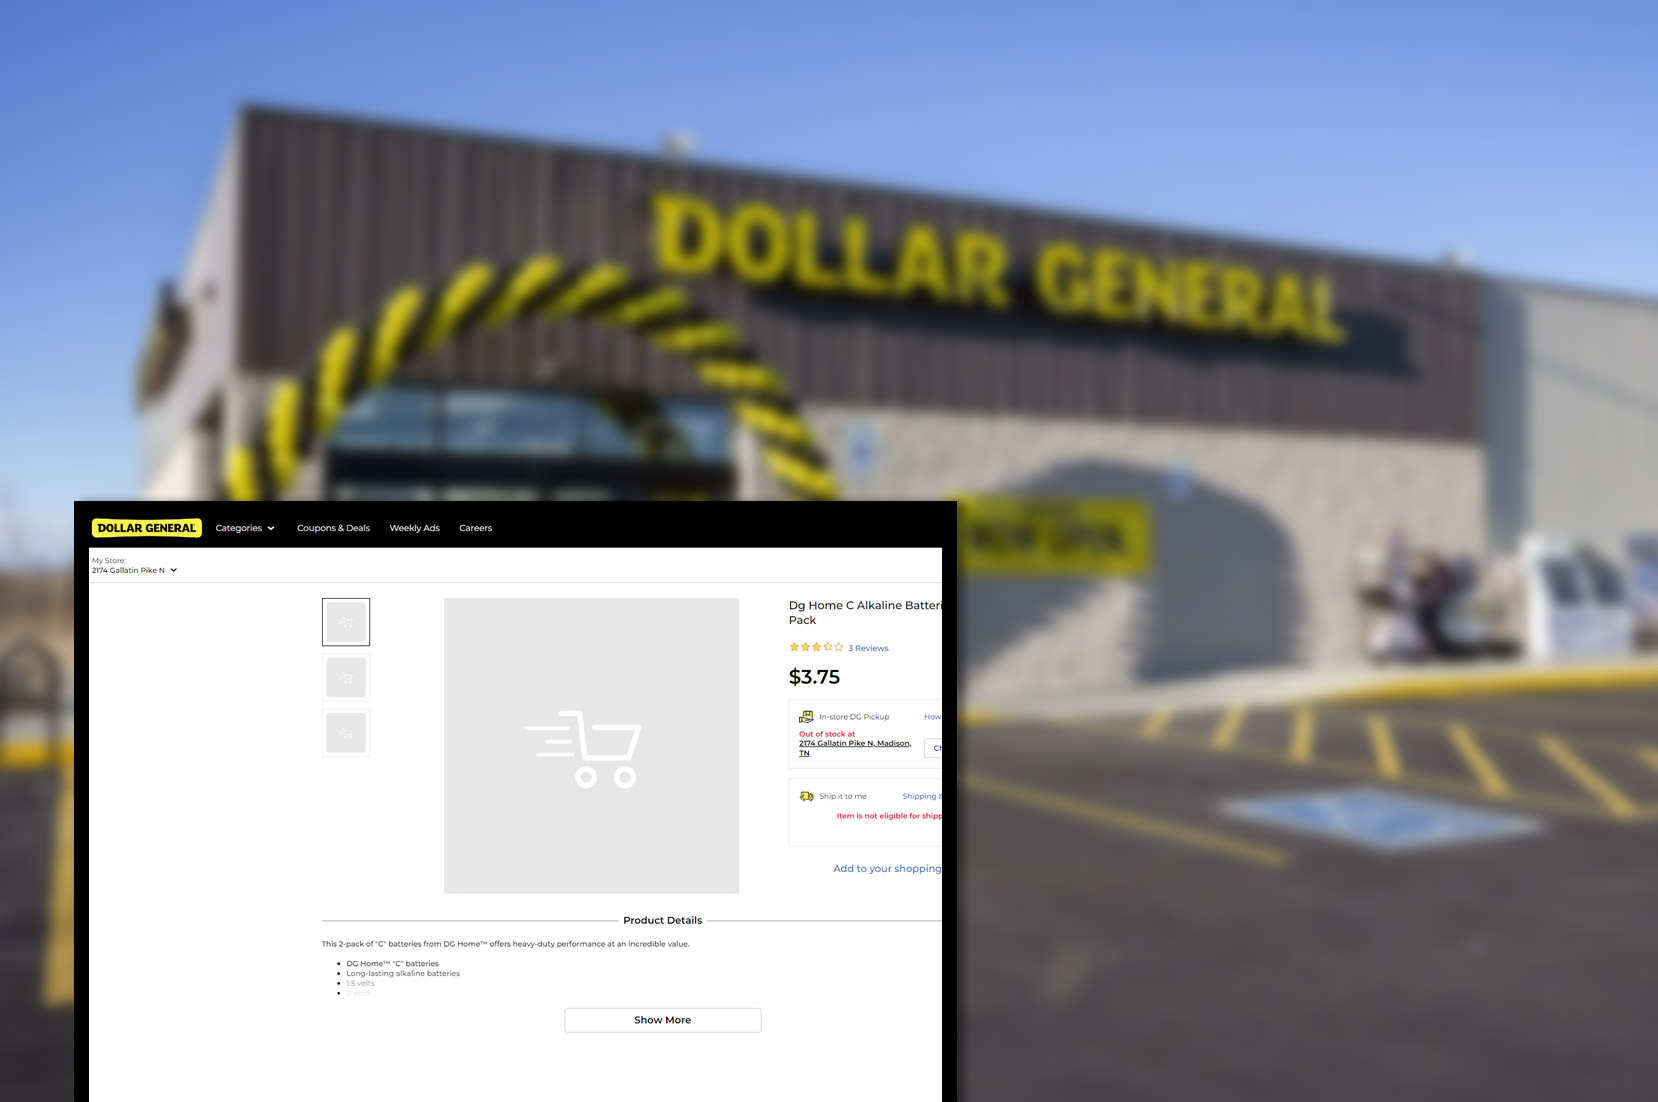 dollargeneral-comproduct-pricing-information-and-image-scraping-services